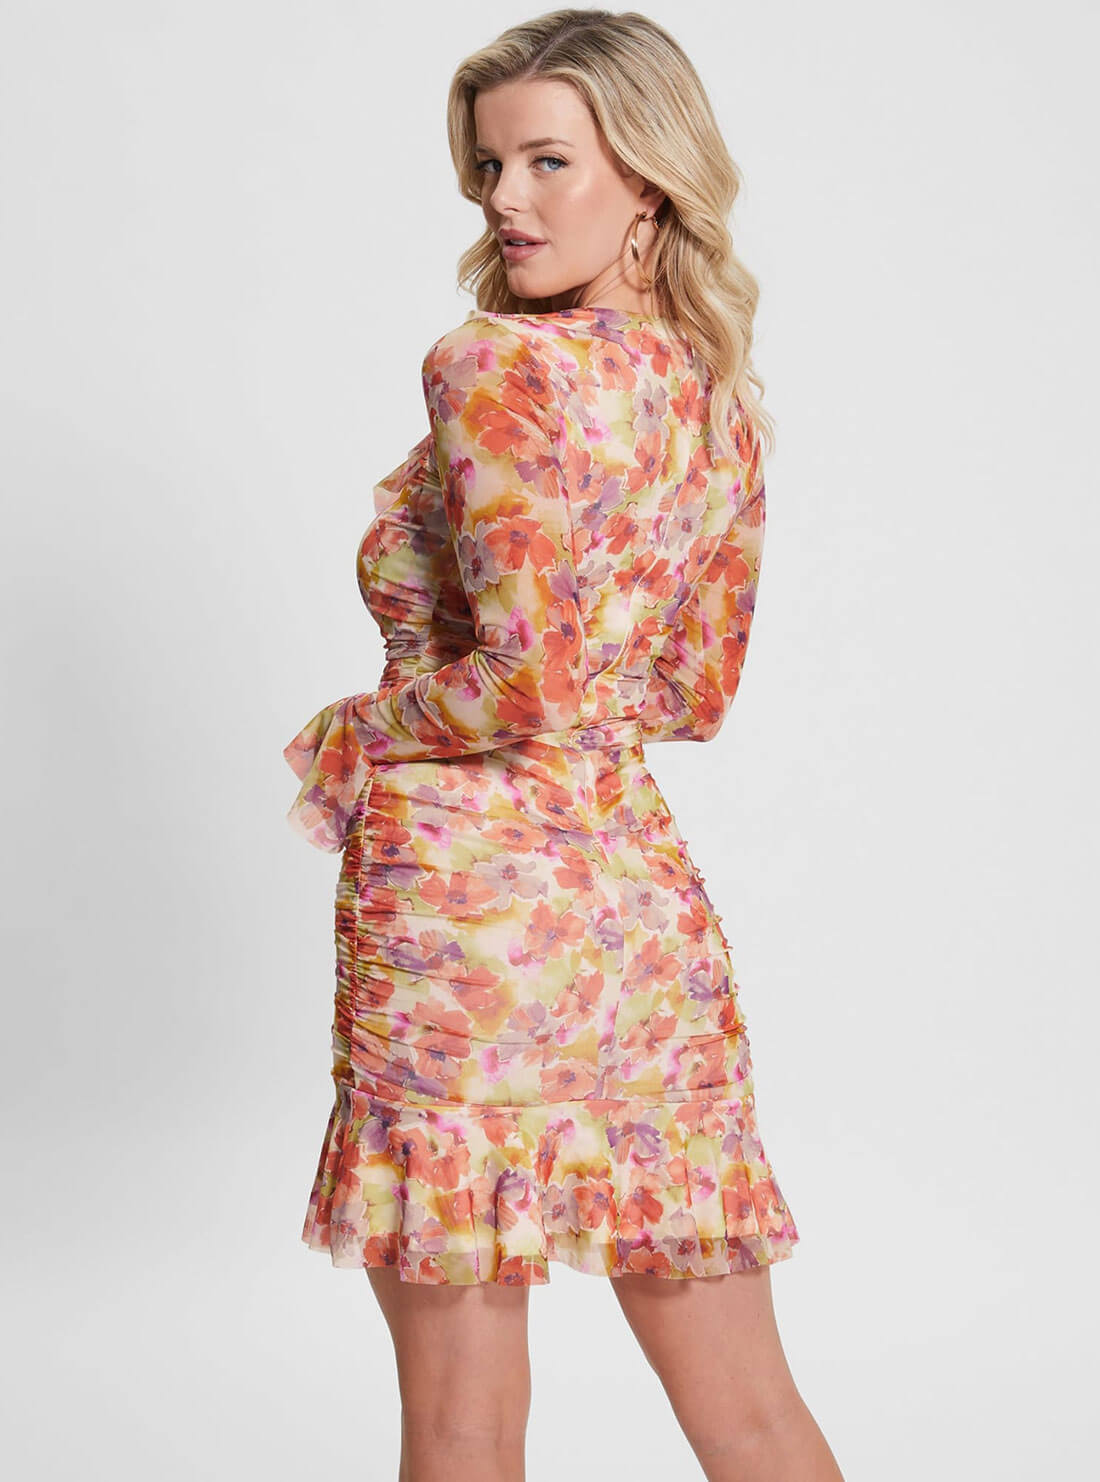 Eco Floral Rosalee Mini Dress | GUESS Women's Apparel | back view